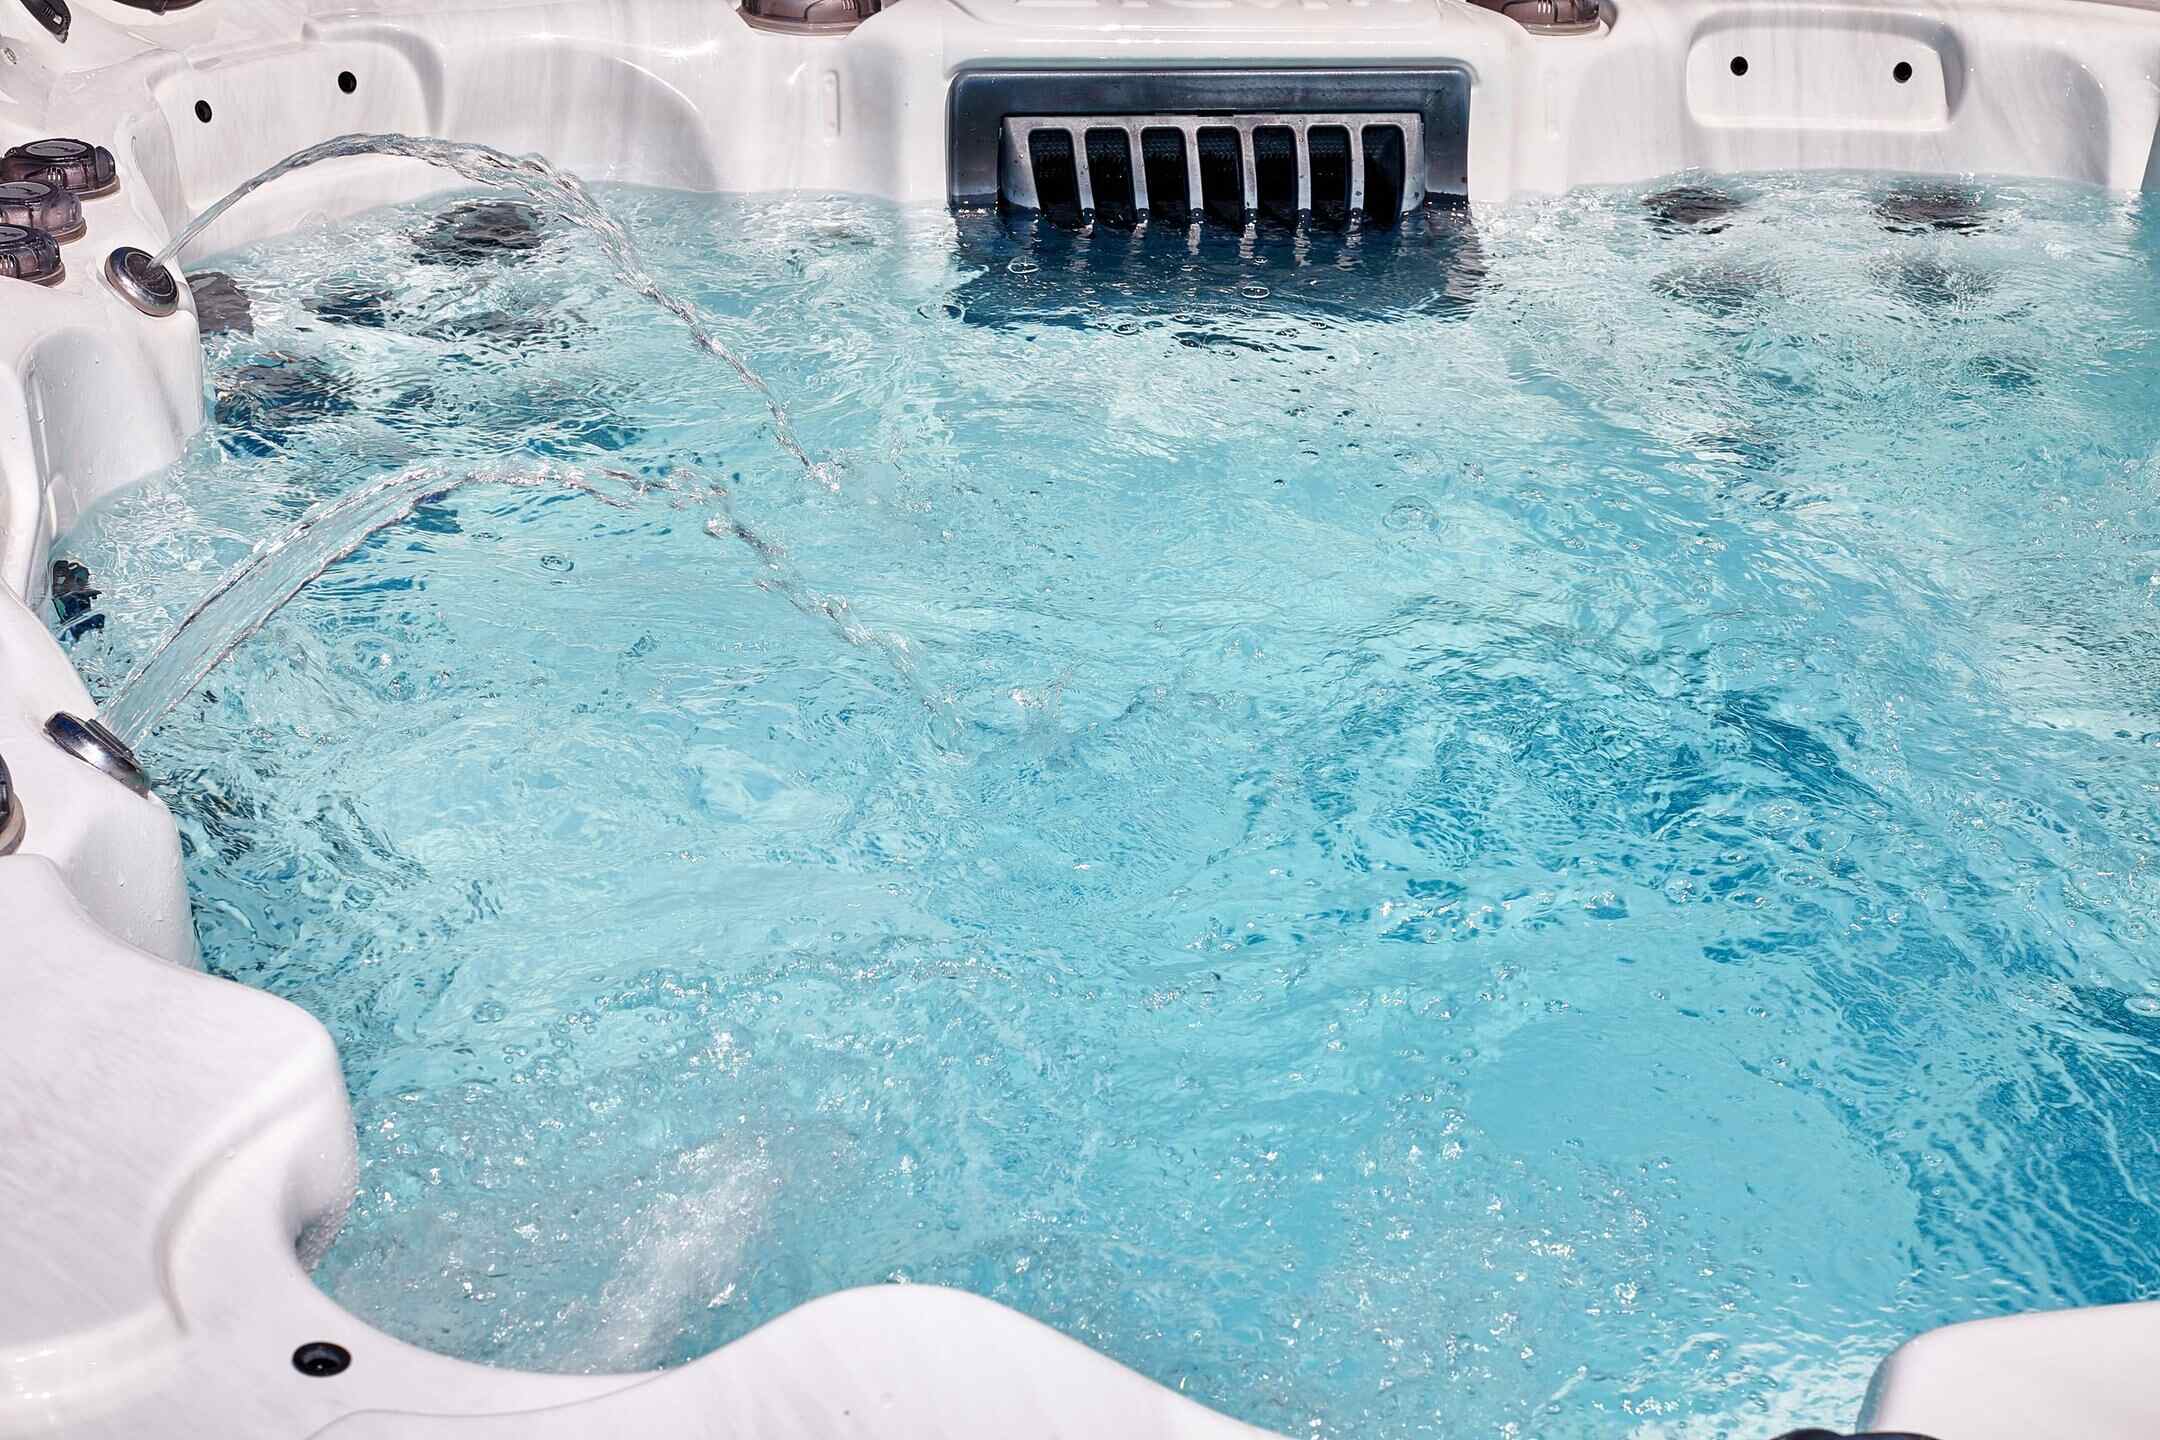 How To Get Rid Of Scaling In Hot Tub